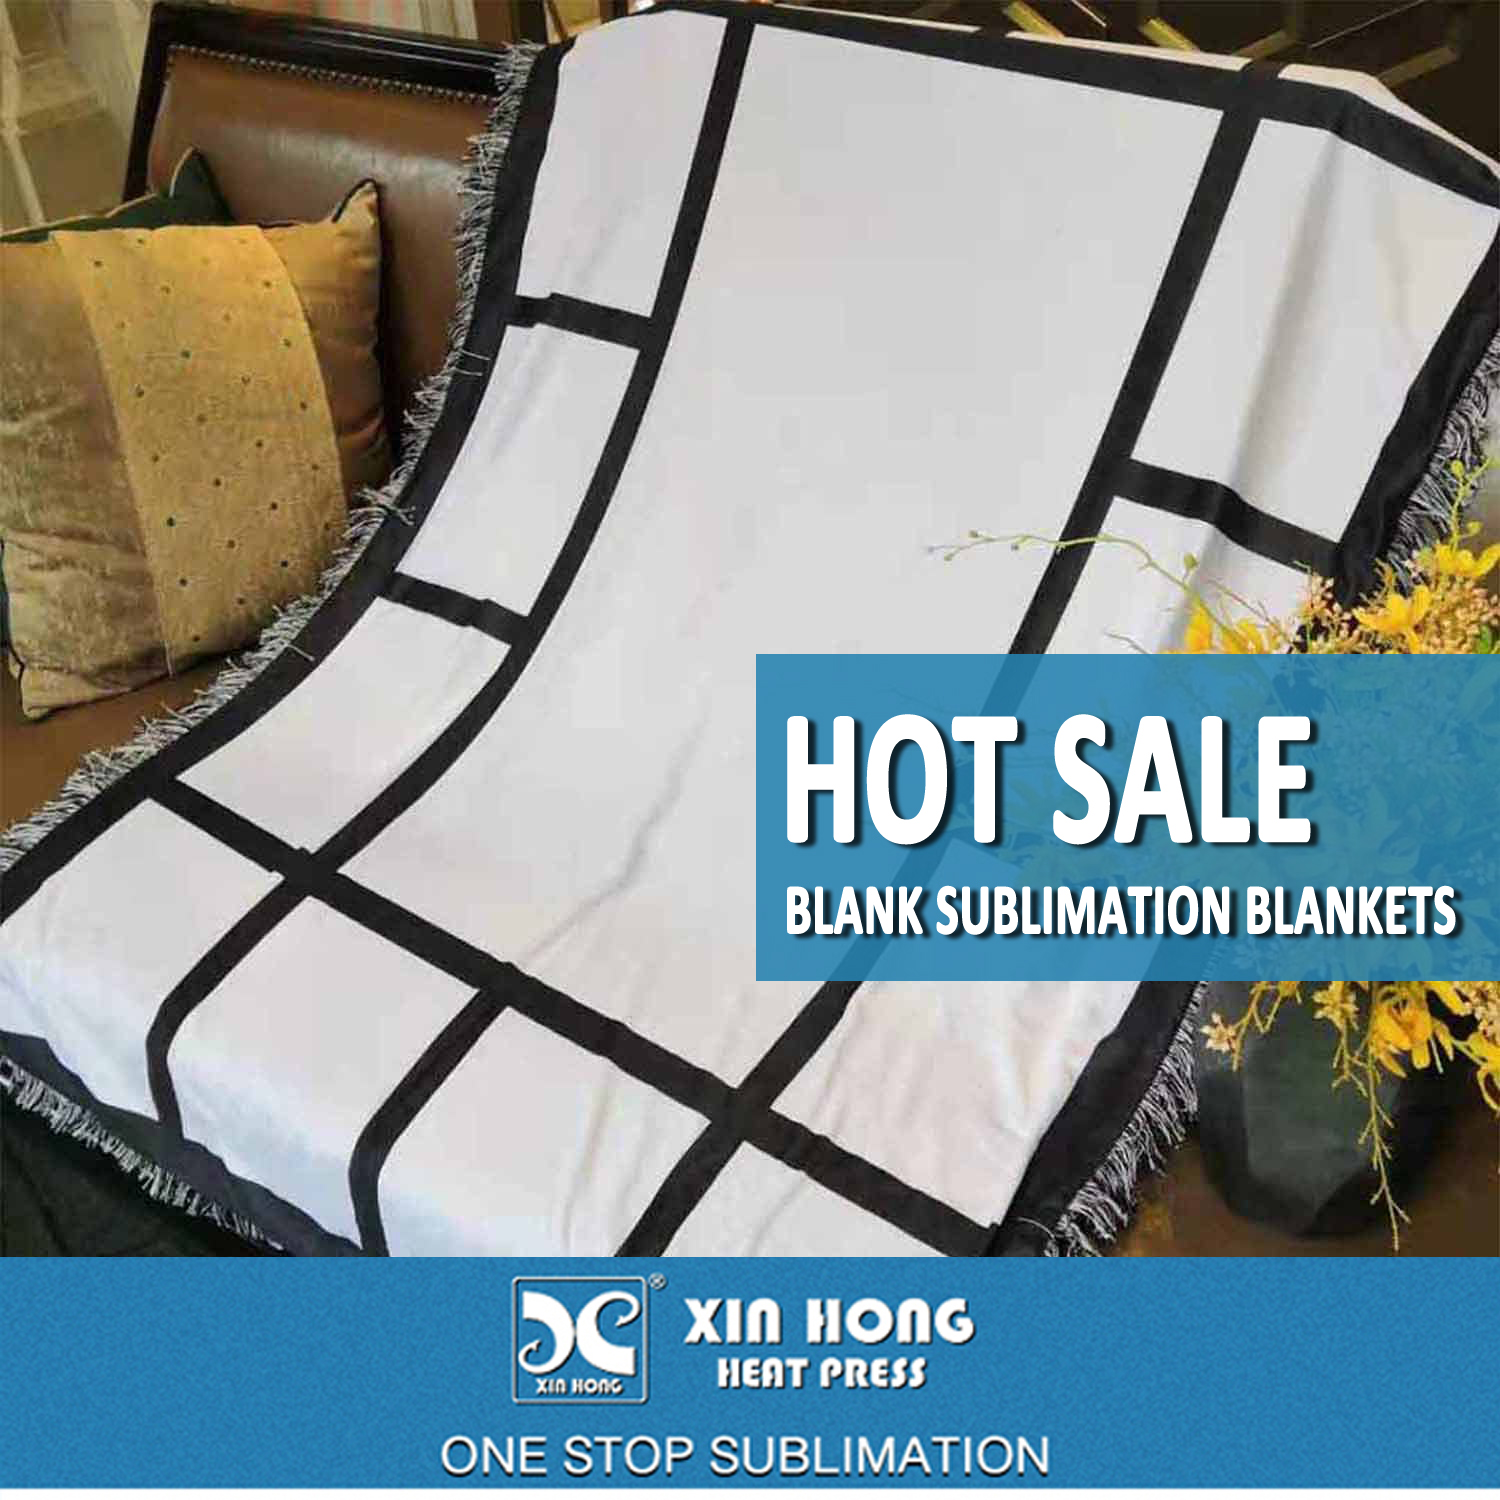 BlankoBlanks Wholesale Sublimation Blanks & More